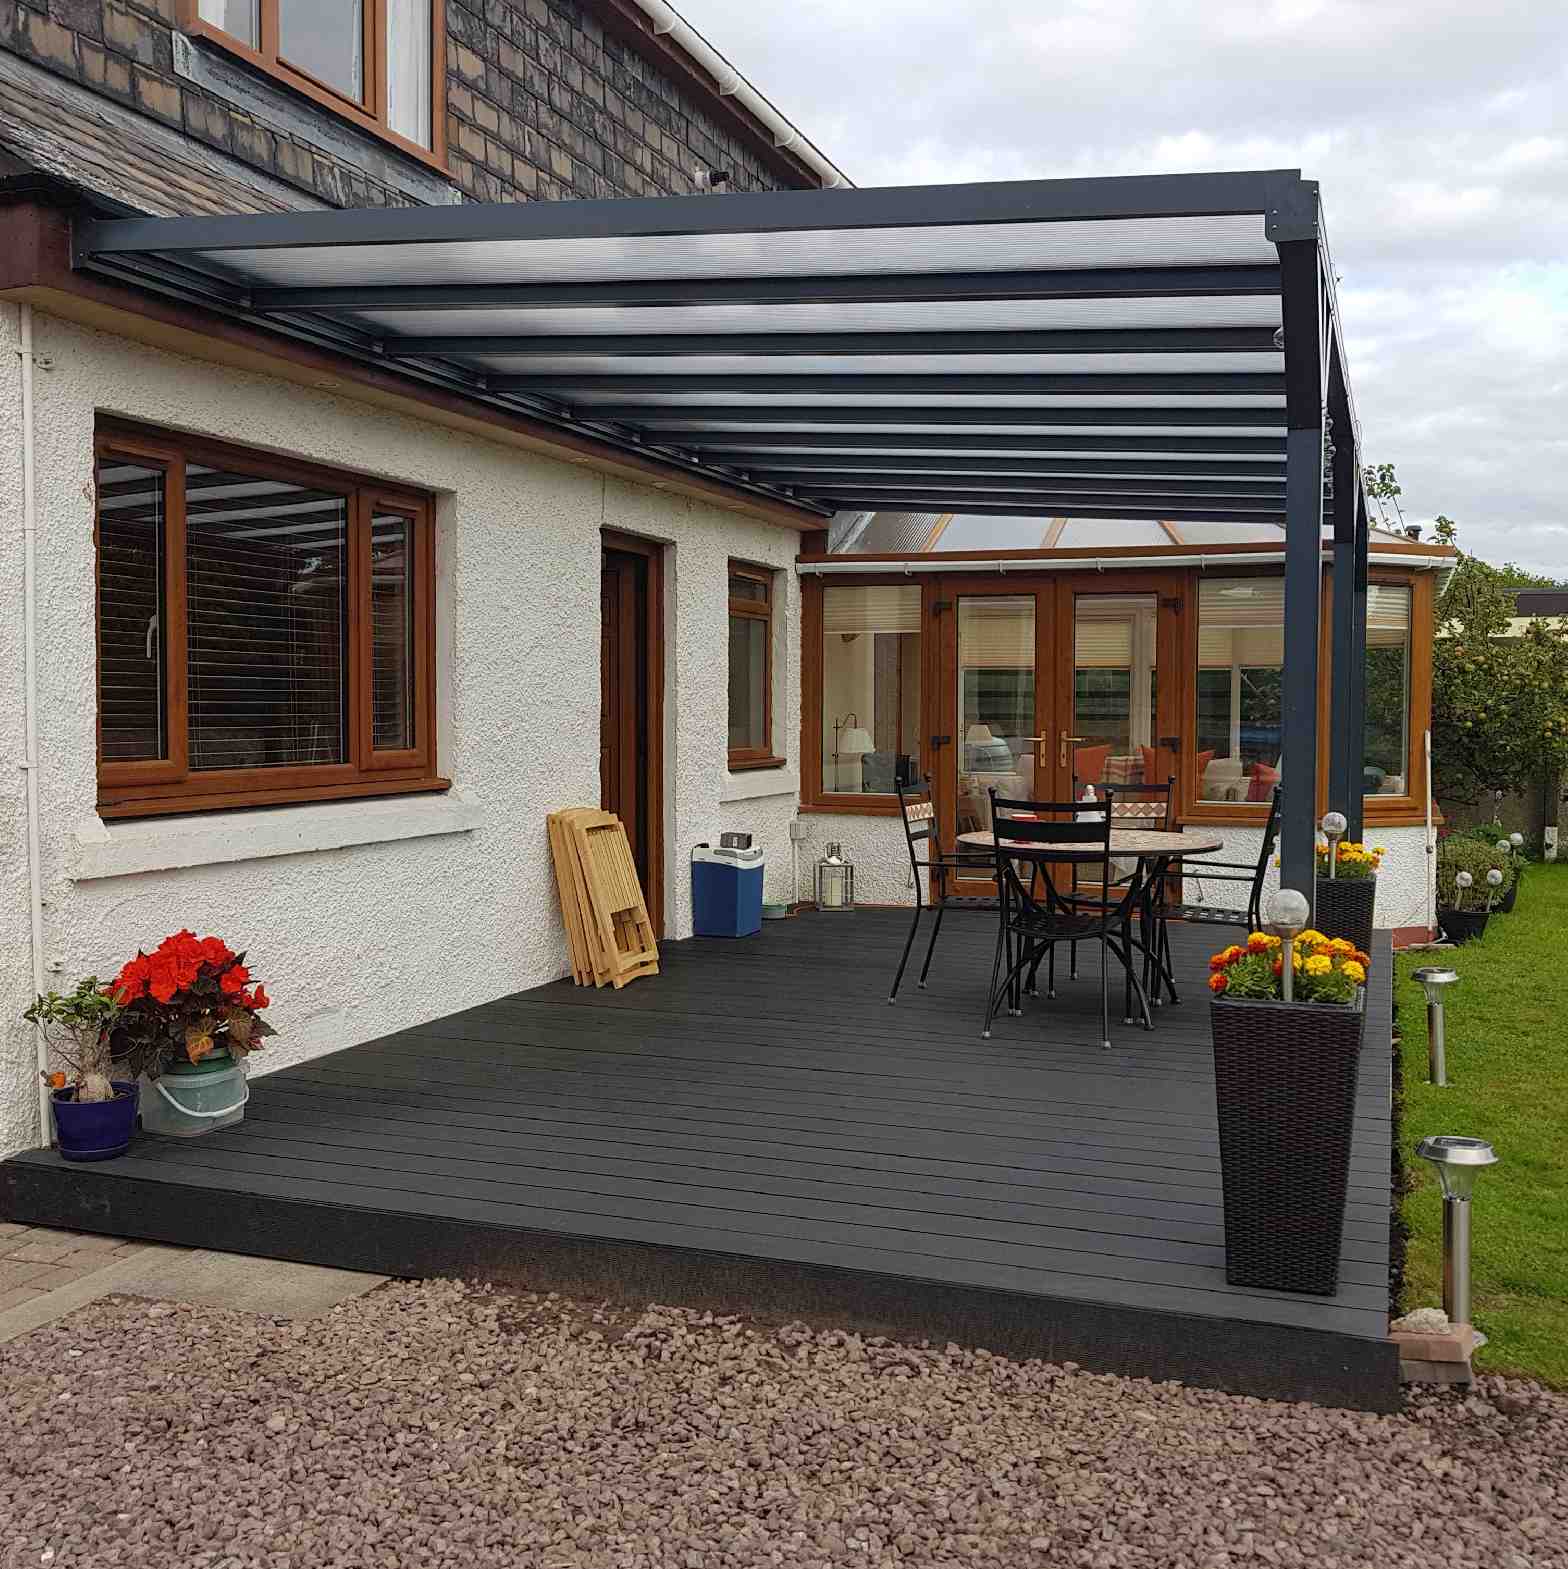 Buy Omega Verandah, Anthracite Grey, 16mm Polycarbonate Glazing - 2.8m (W) x 3.5m (P), (2) Supporting Posts online today